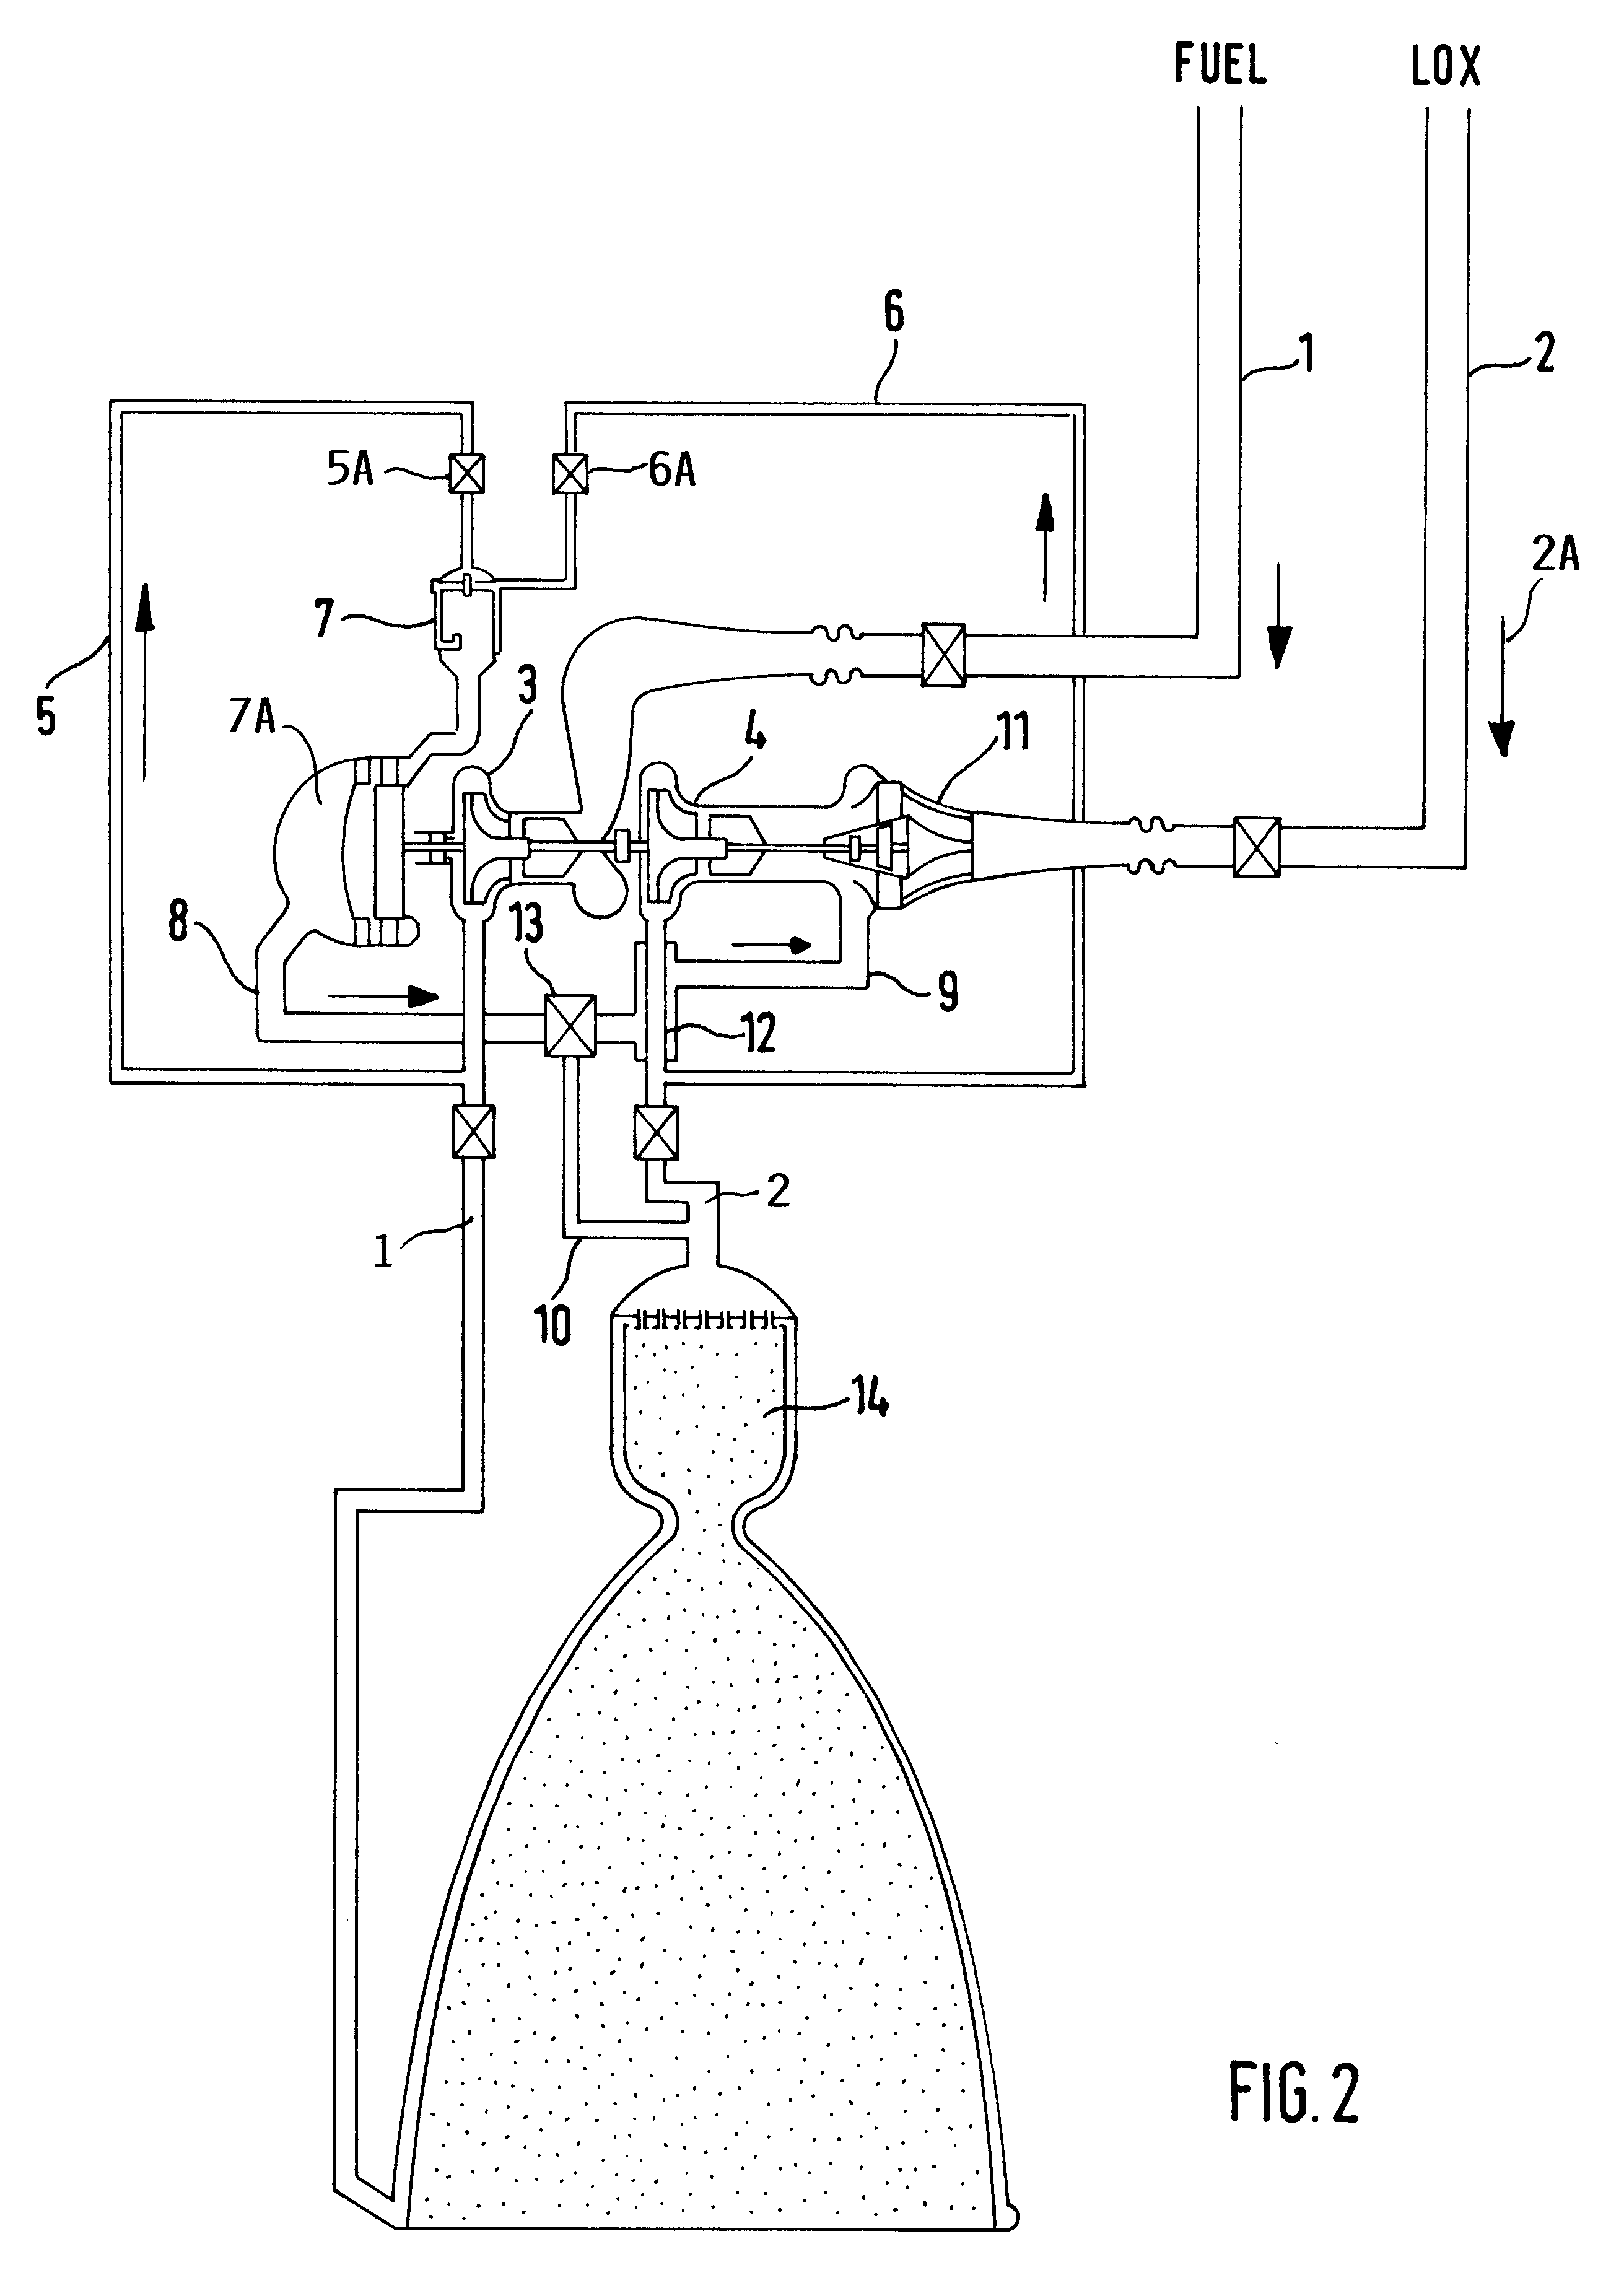 Liquid fuel rocket engine with a closed flow cycle